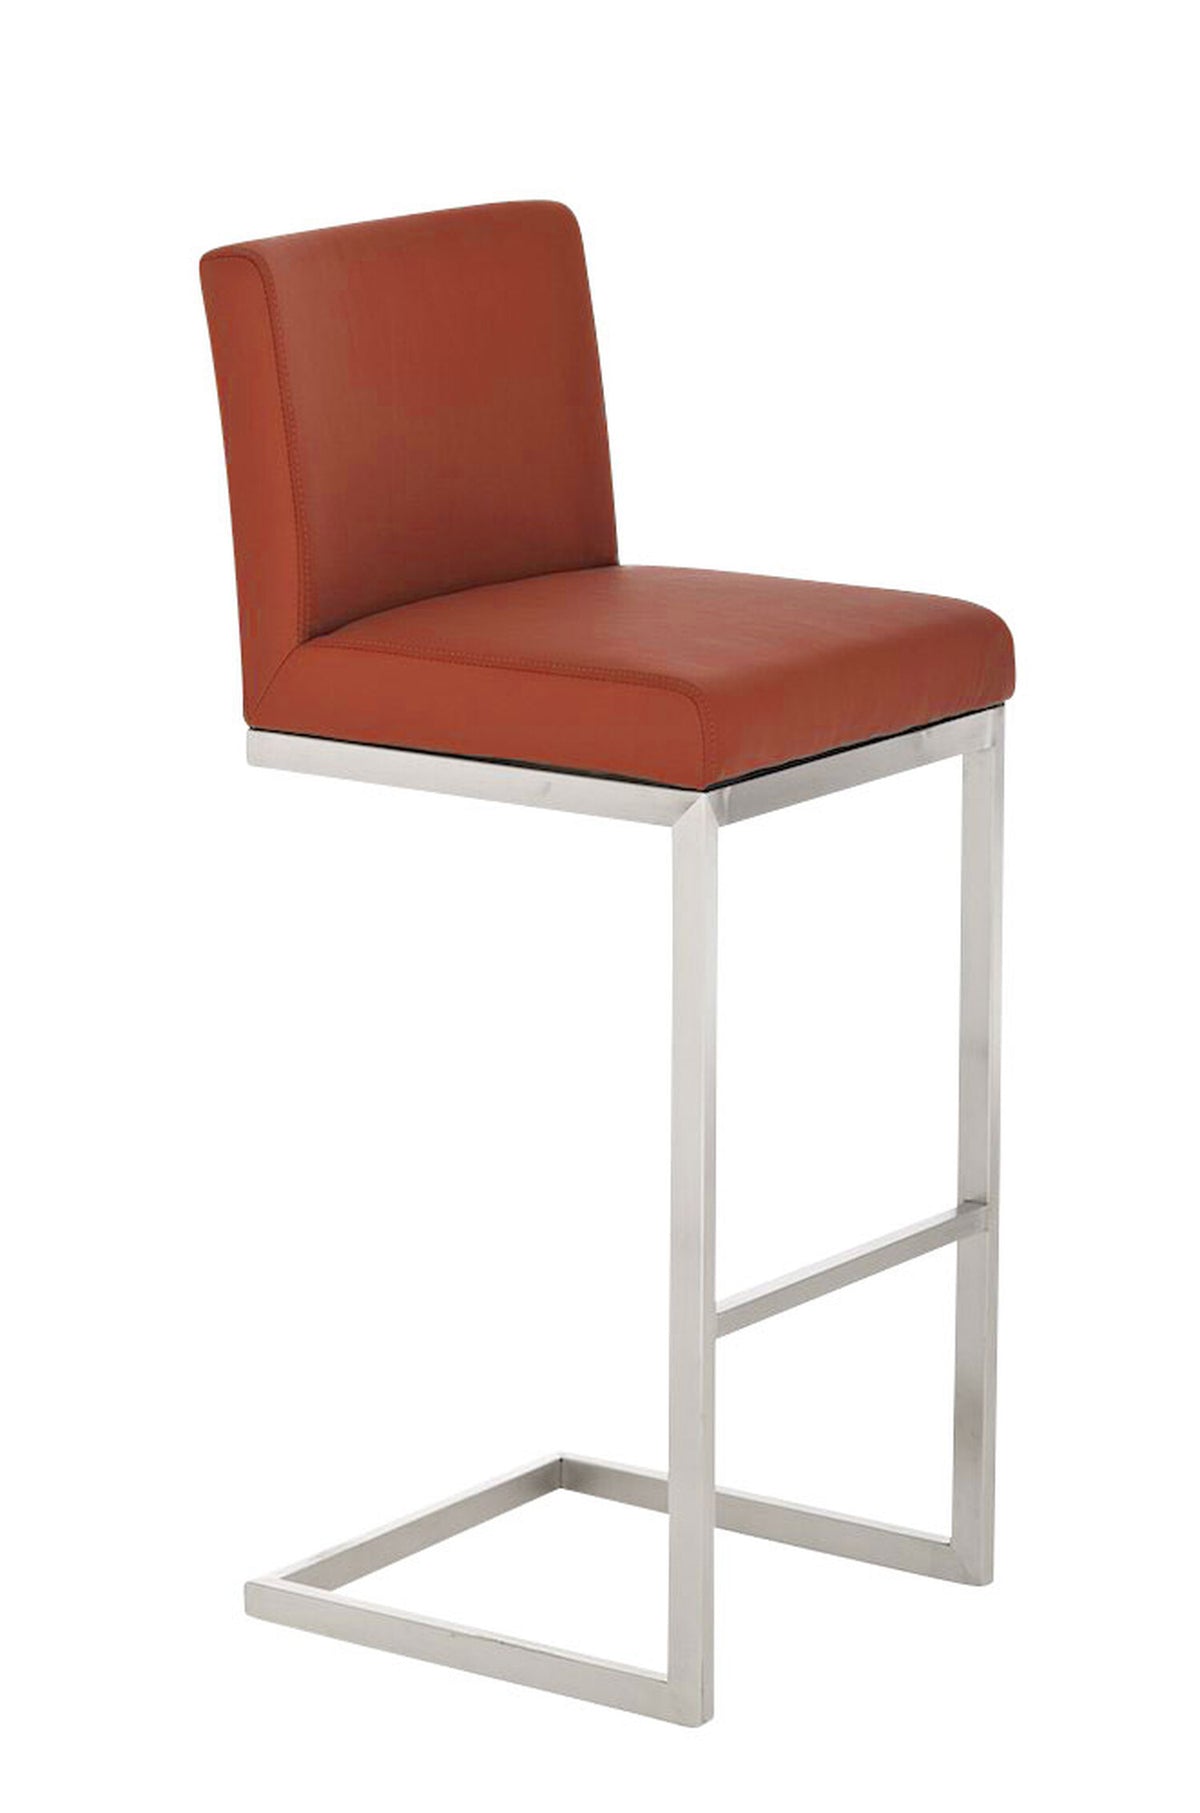 TPFLiving bar stool Paragon frame stainless steel faux leather